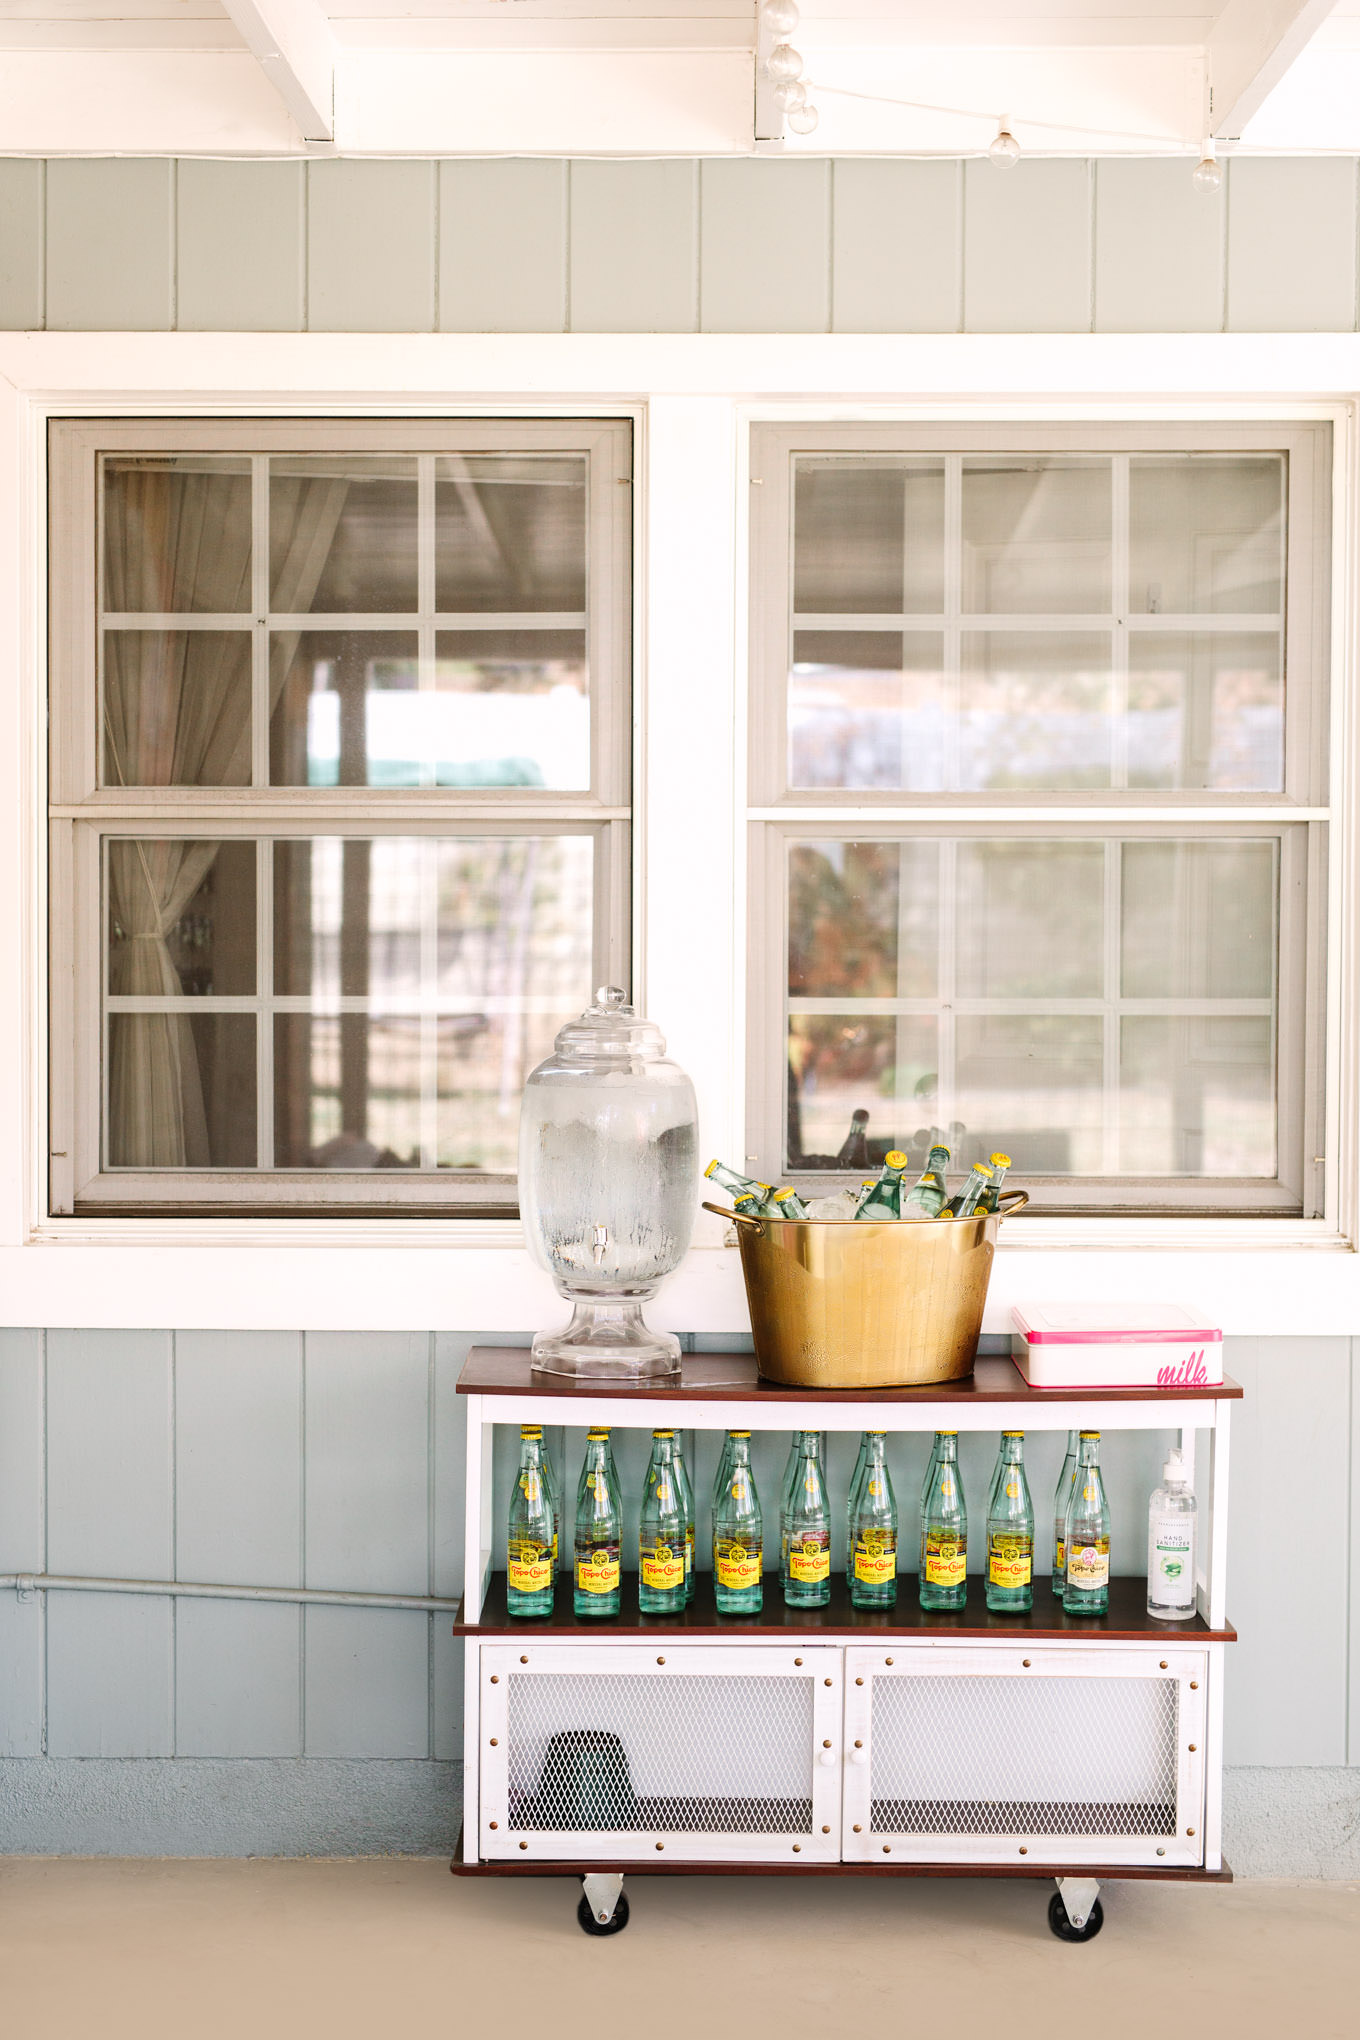 Unique water station for California micro wedding | Vibrant backyard micro wedding featured on Green Wedding Shoes | Colorful LA wedding photography | #losangeleswedding #backyardwedding #microwedding #laweddingphotographer Source: Mary Costa Photography | Los Angeles